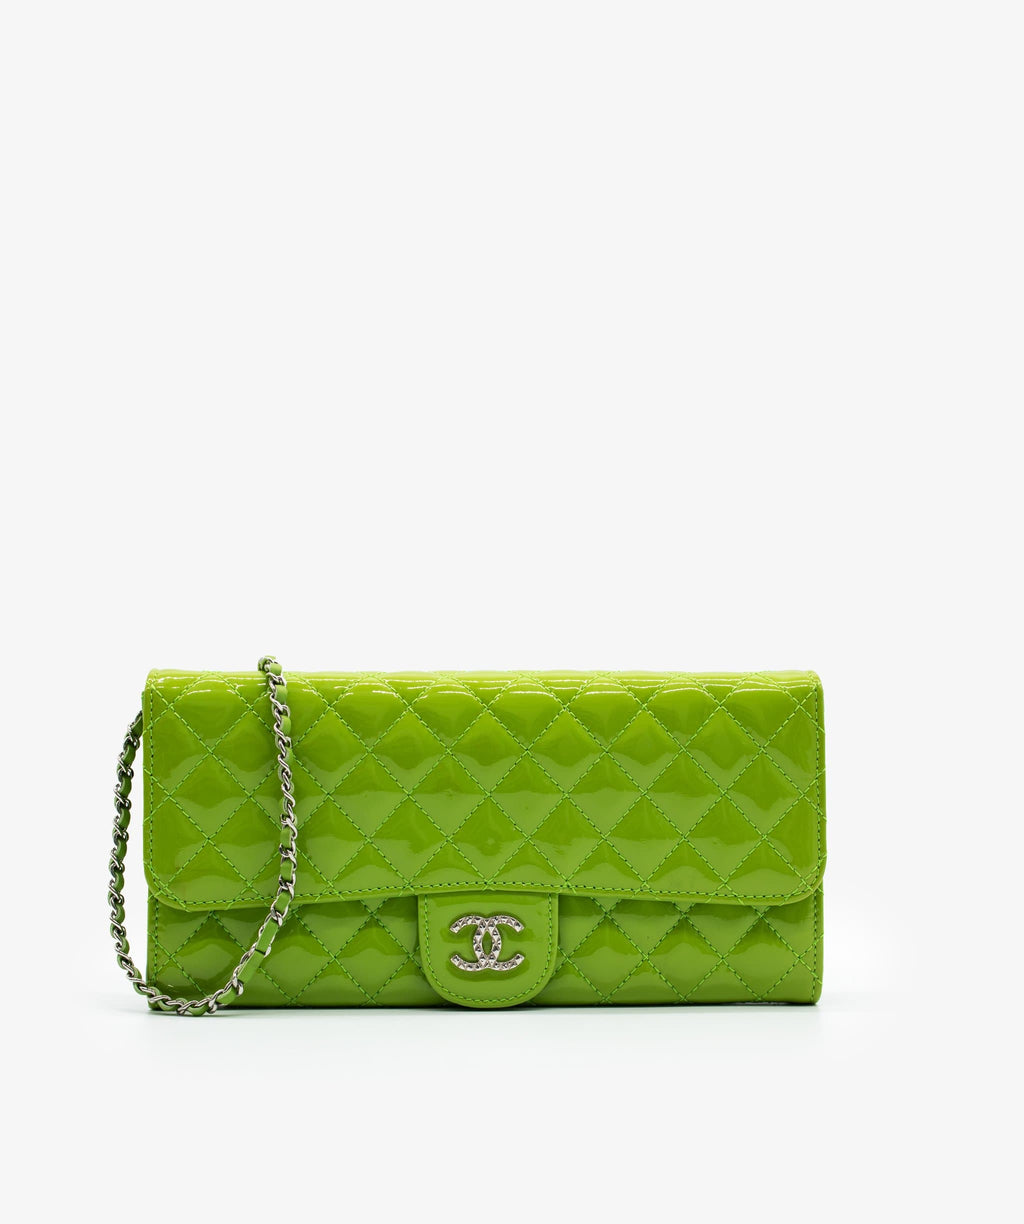 Authentic Second Hand Chanel HalfMoon Crossbody Bag TFC10700026  THE  FIFTH COLLECTION